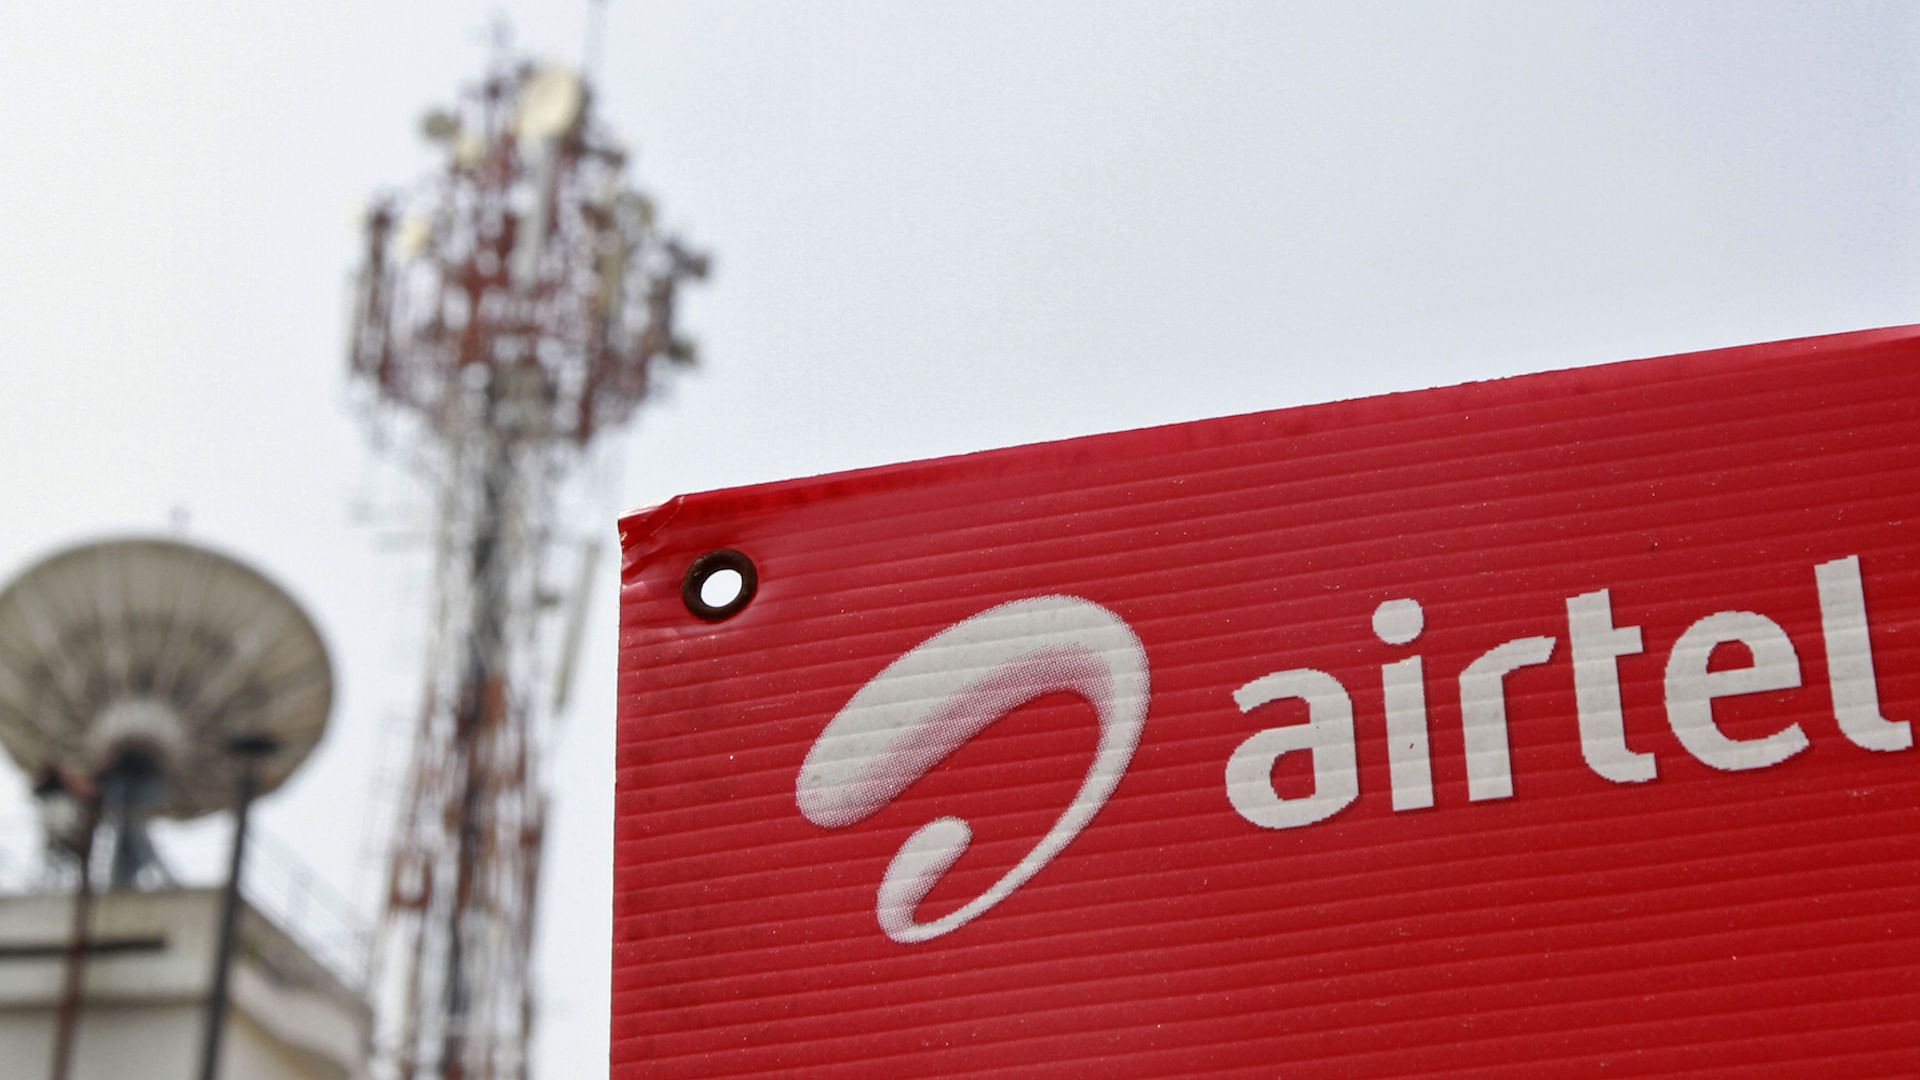 Bharti Airtel has said it will offer up to 30 GB of additional data for three months to its postpaid customers.